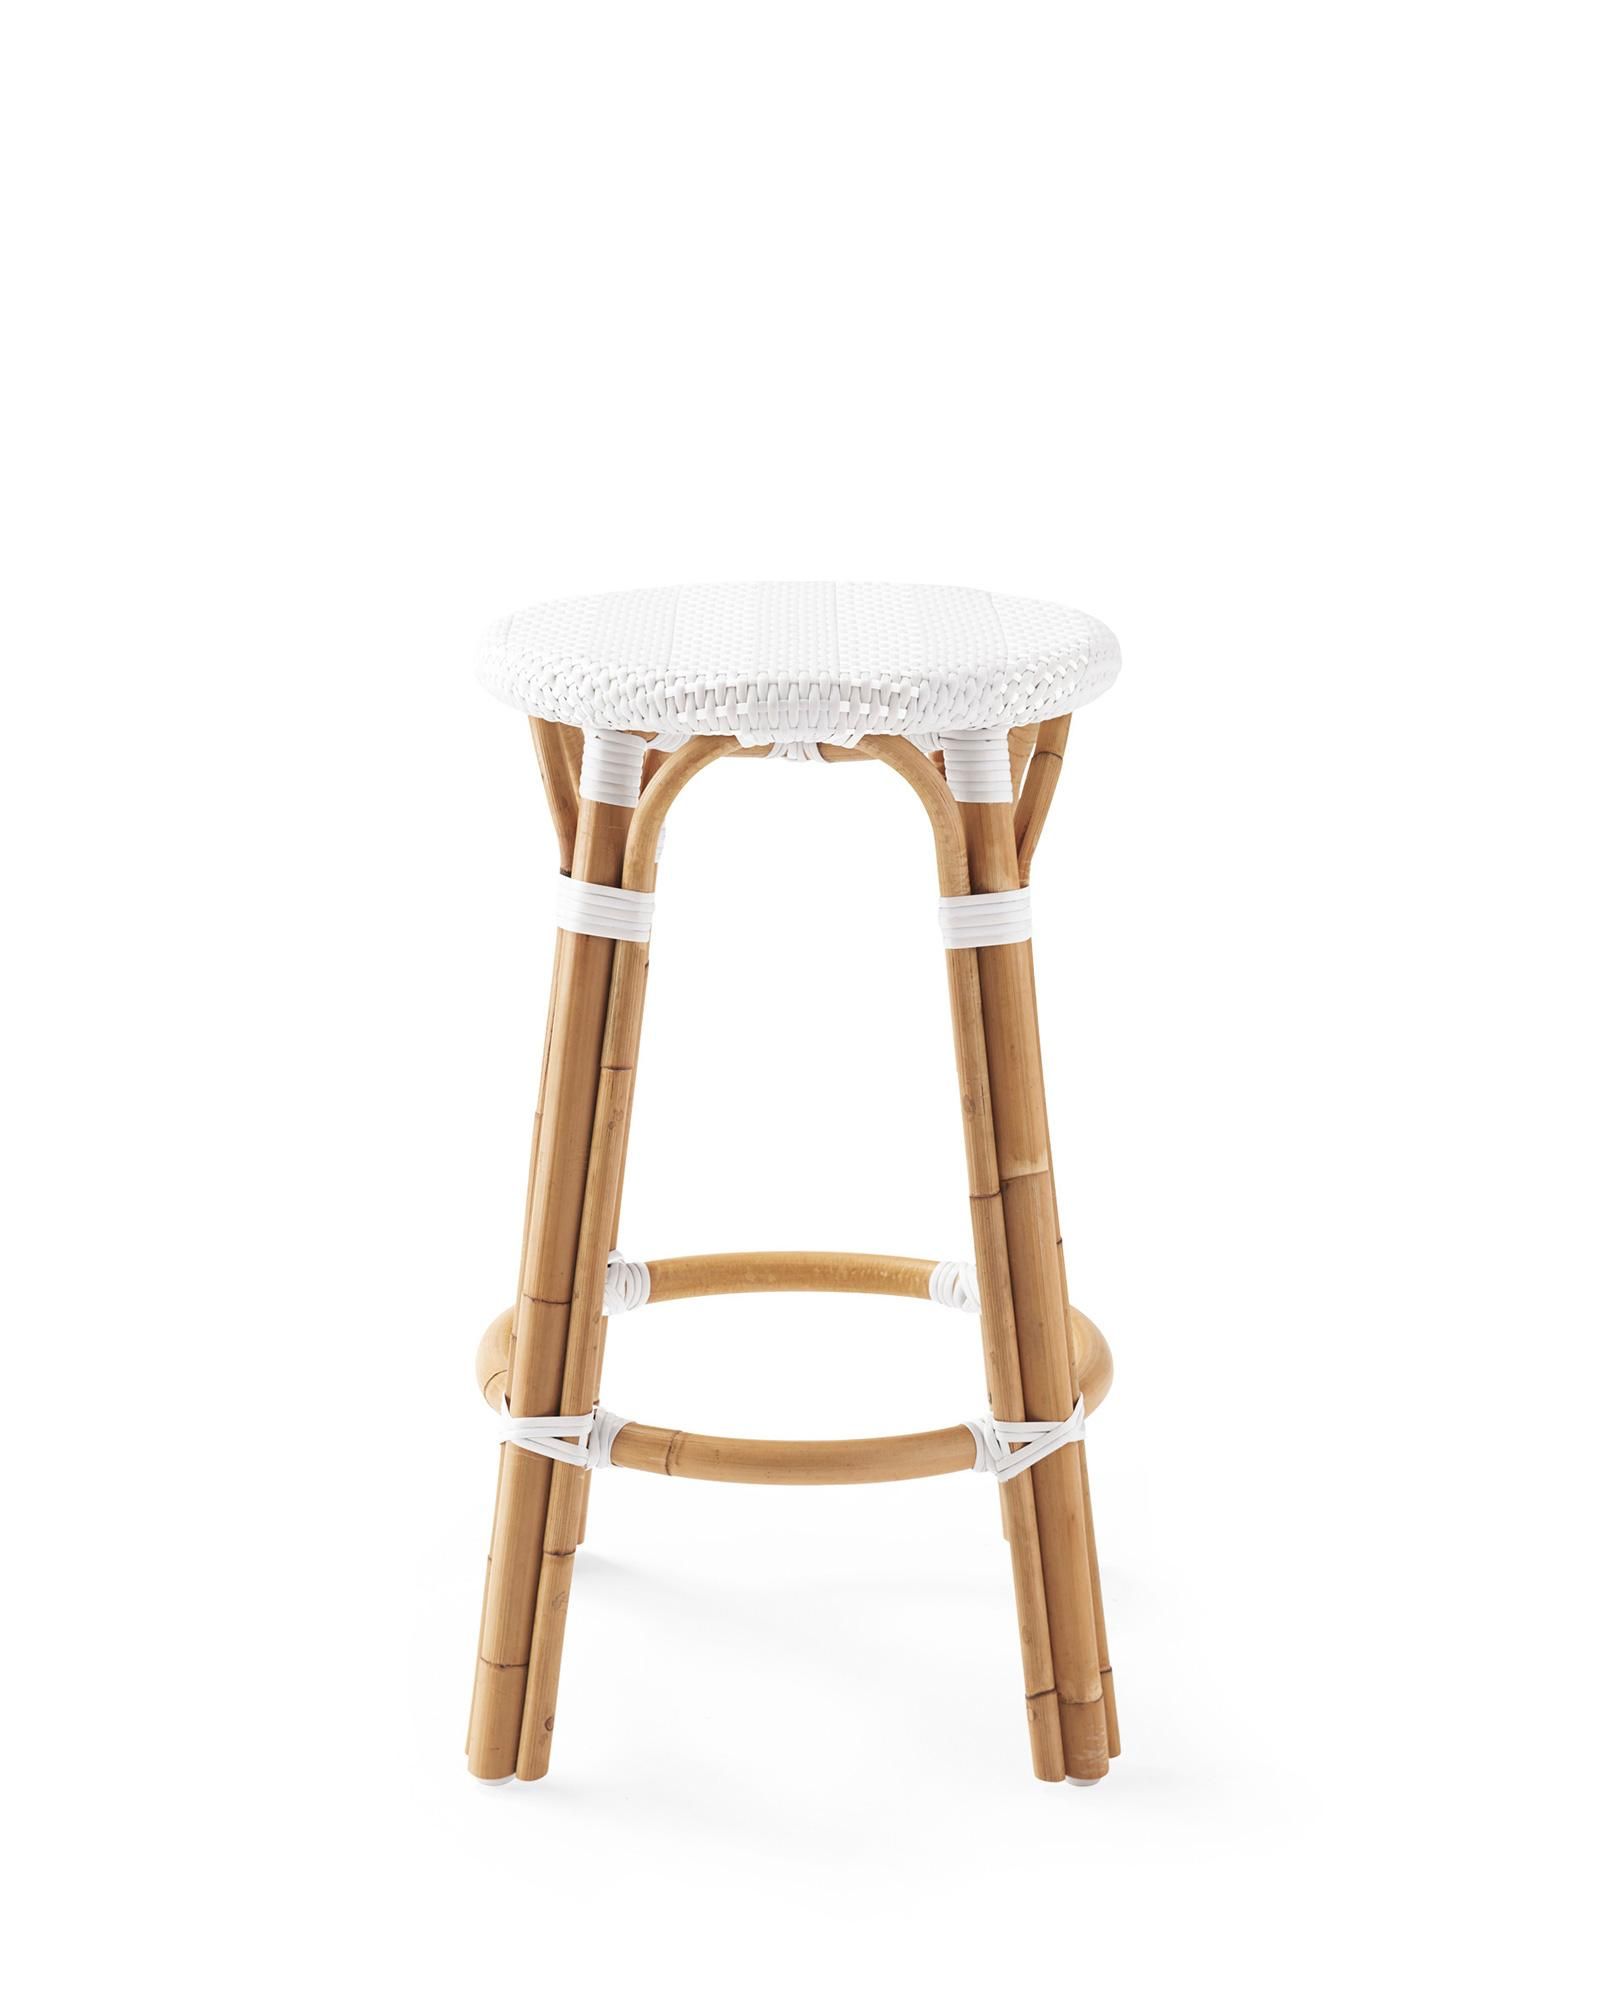 Riviera Rattan Backless Counter Stool | Serena and Lily